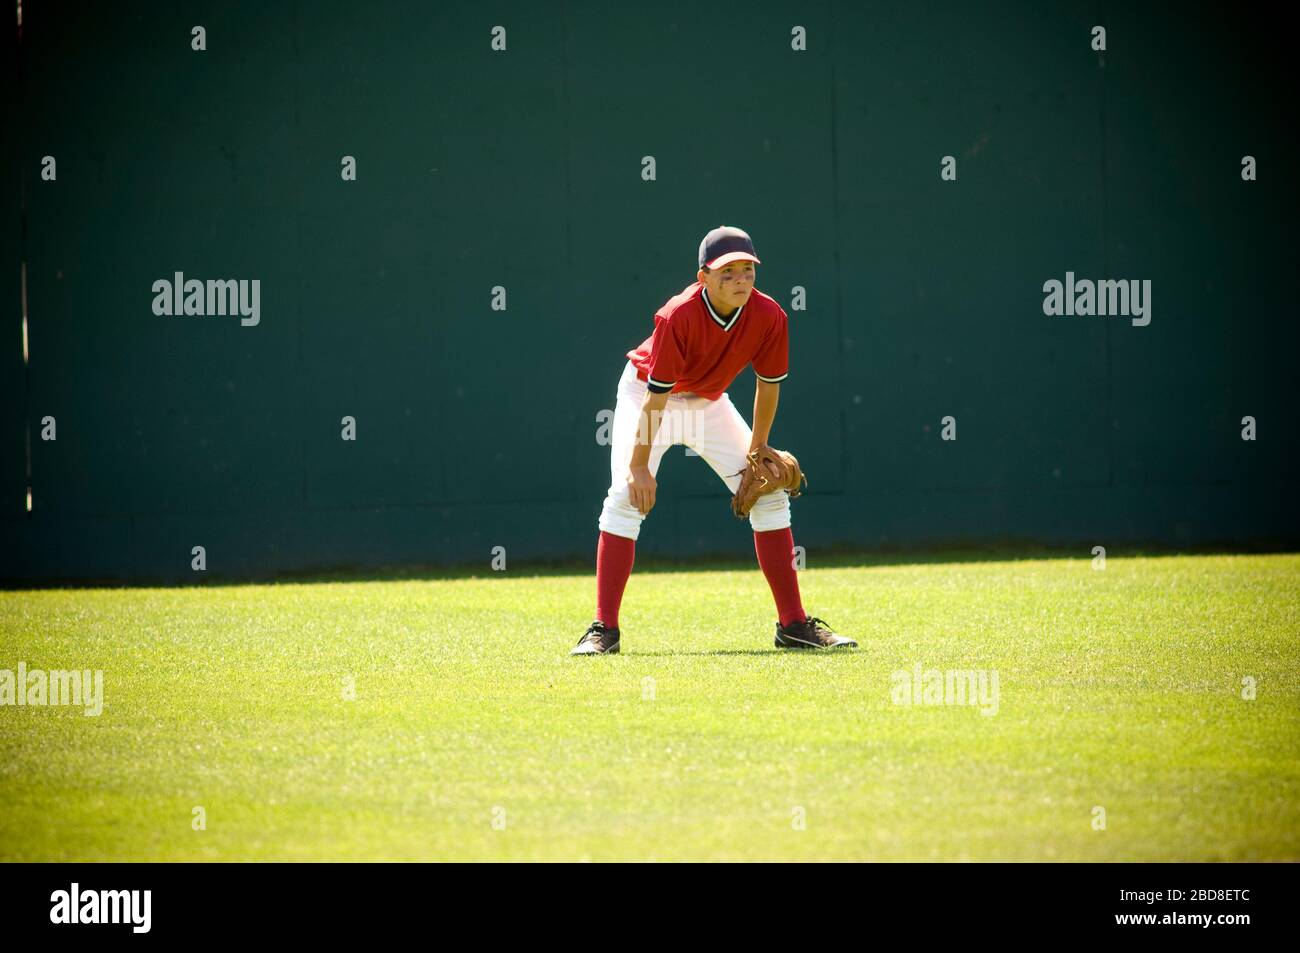 Boy in ready position in the outfield of a baseball field Stock Photo